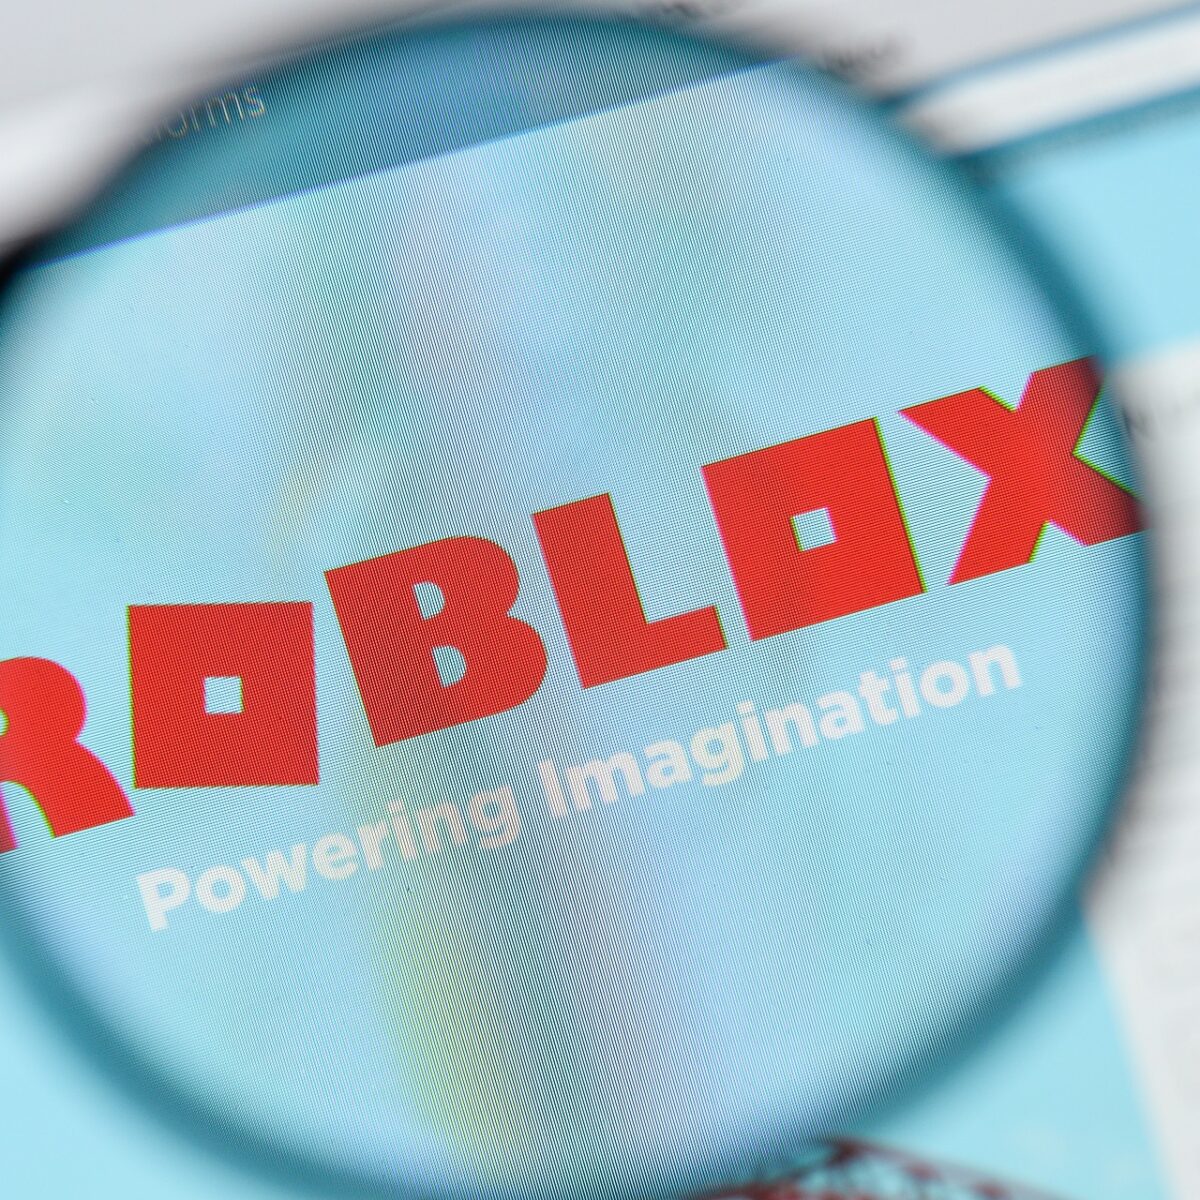 Fix Your Browser Is Not Supported Roblox Error - roblox won t work on google chrome here s how to fix it